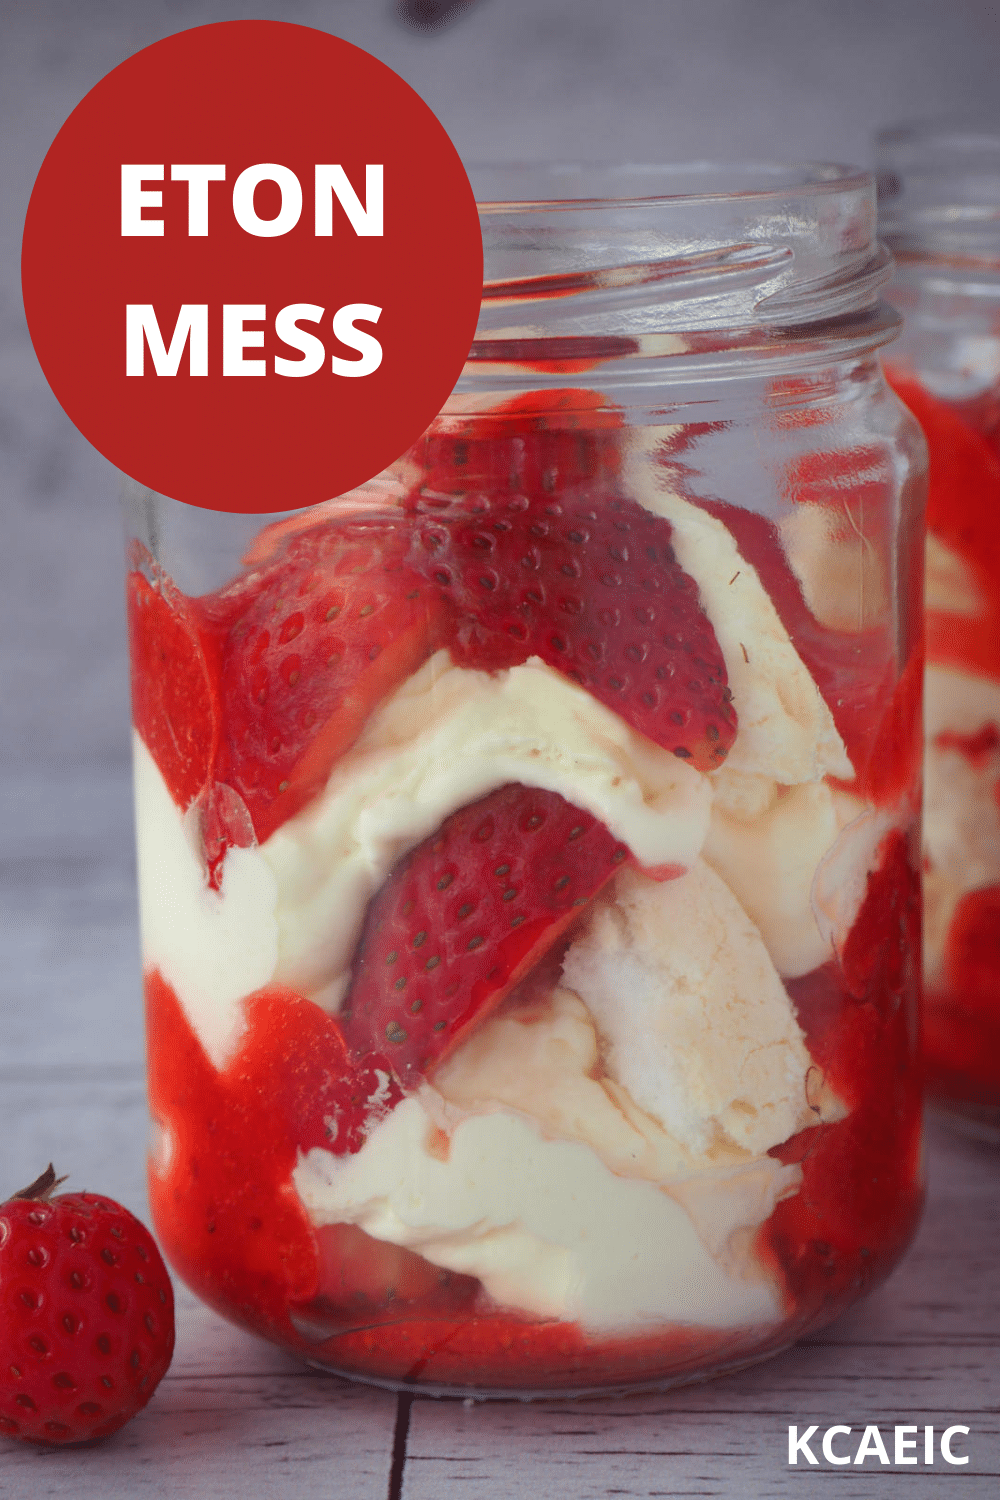 Two jars of Eton mess with fresh strawberries on the side with text overlay, Eton mess, KCAEIC.